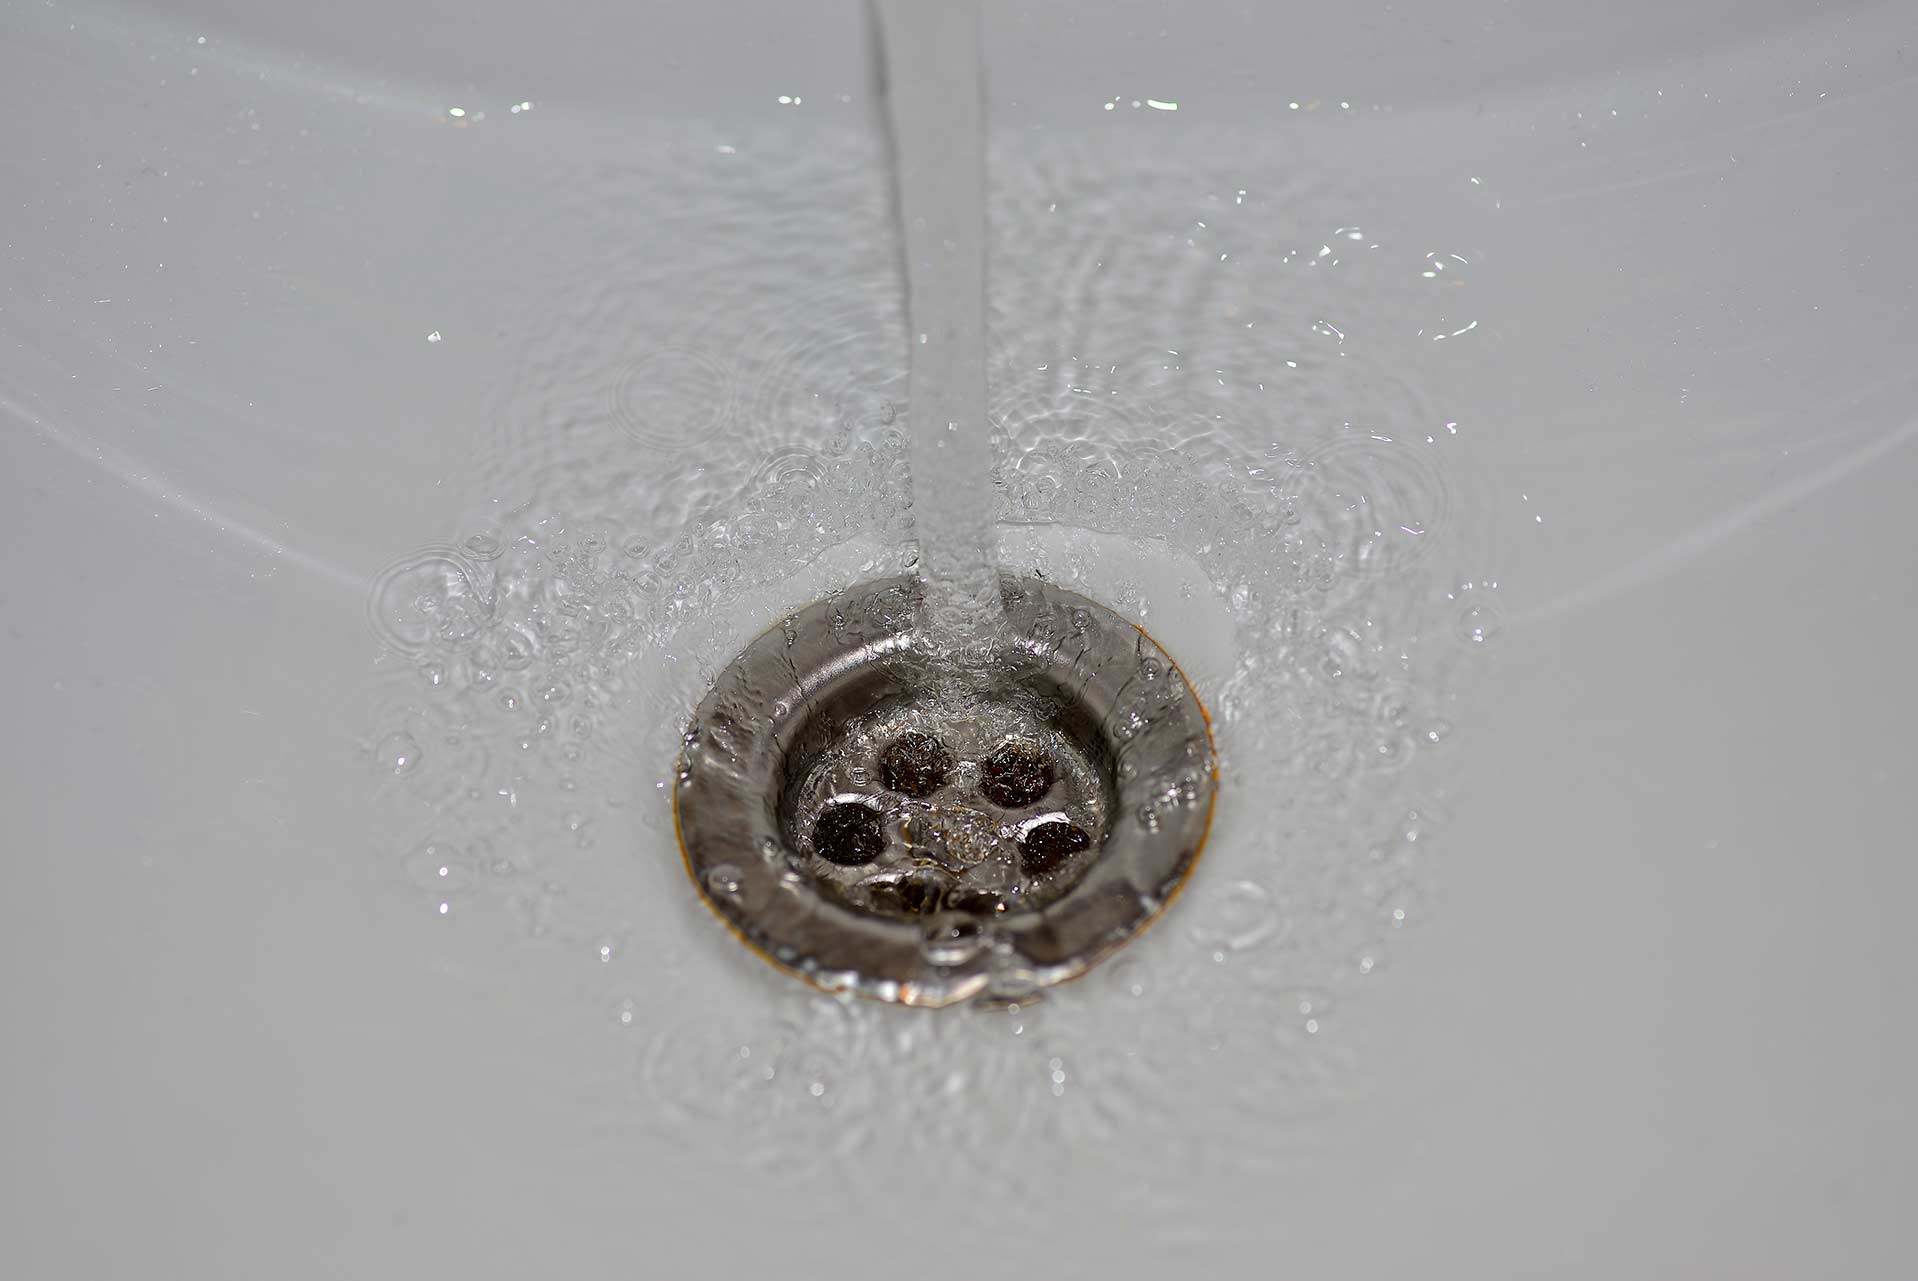 A2B Drains provides services to unblock blocked sinks and drains for properties in Bexhill.